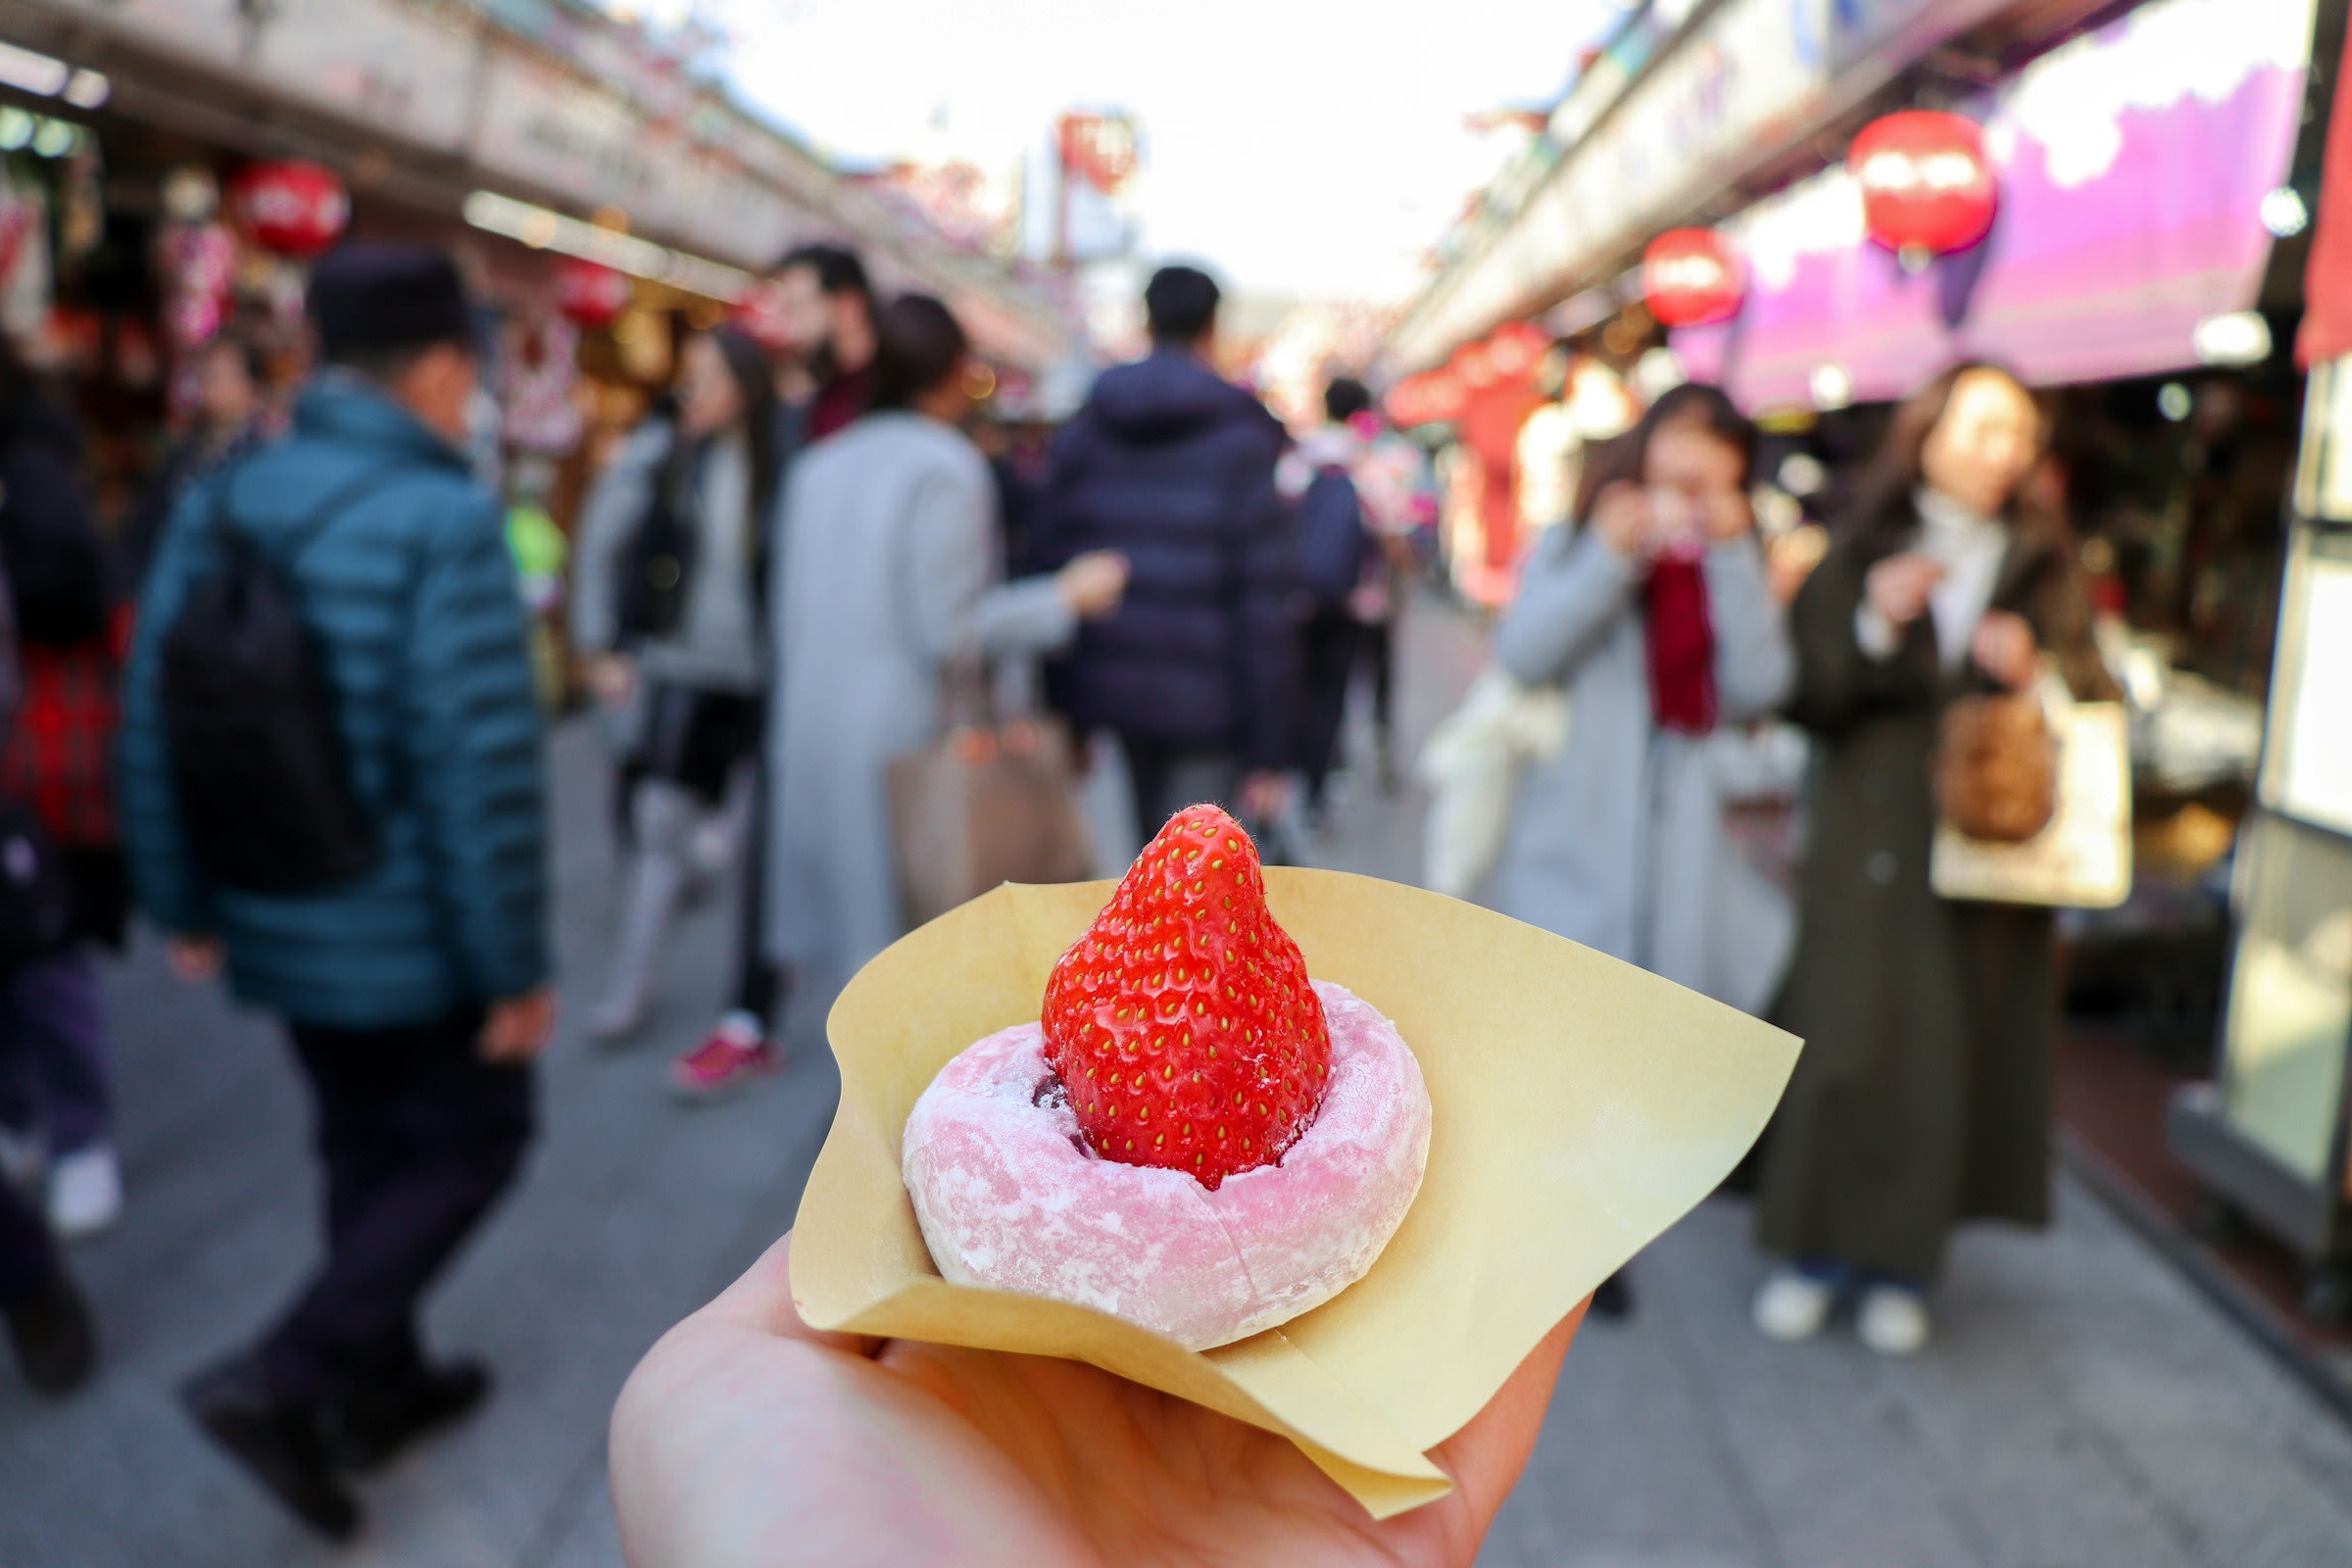 A hand holds a strawberry Saifuku (rice cake filled with sweet bean paste) in the middle of a crowded shopping street.